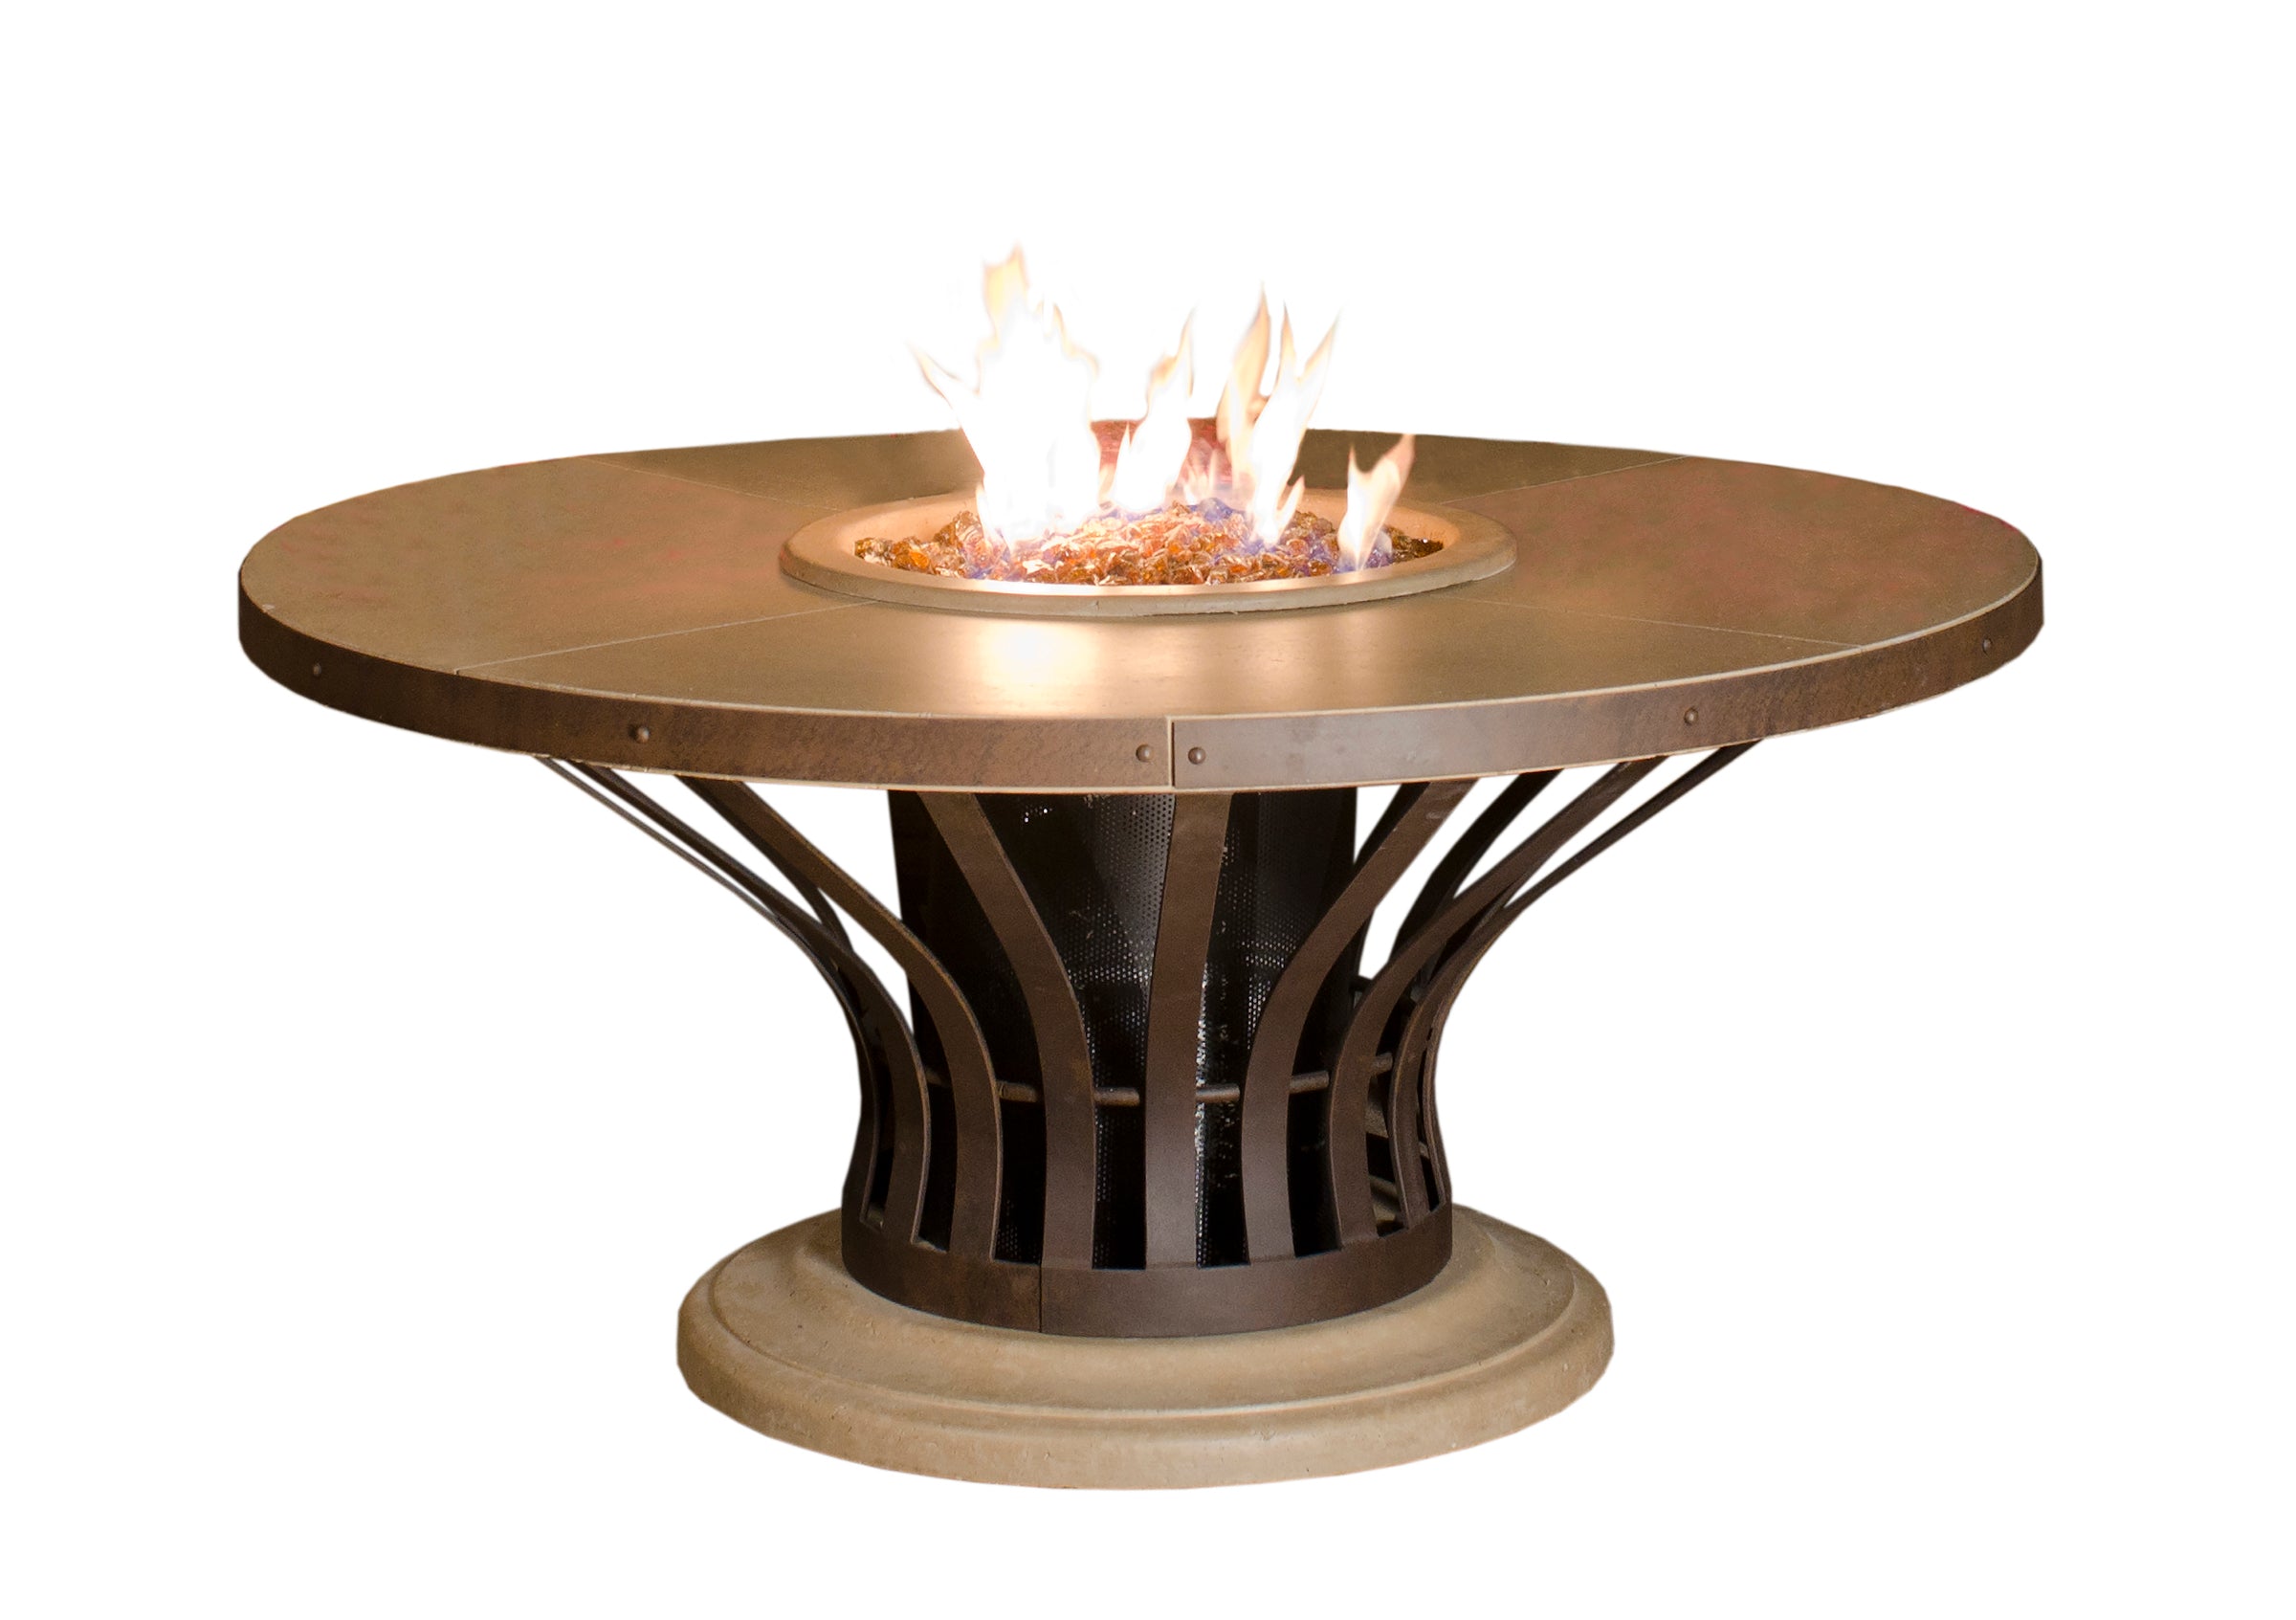 54" Dia. Fiesta Round Fire table  by American Fyre Design